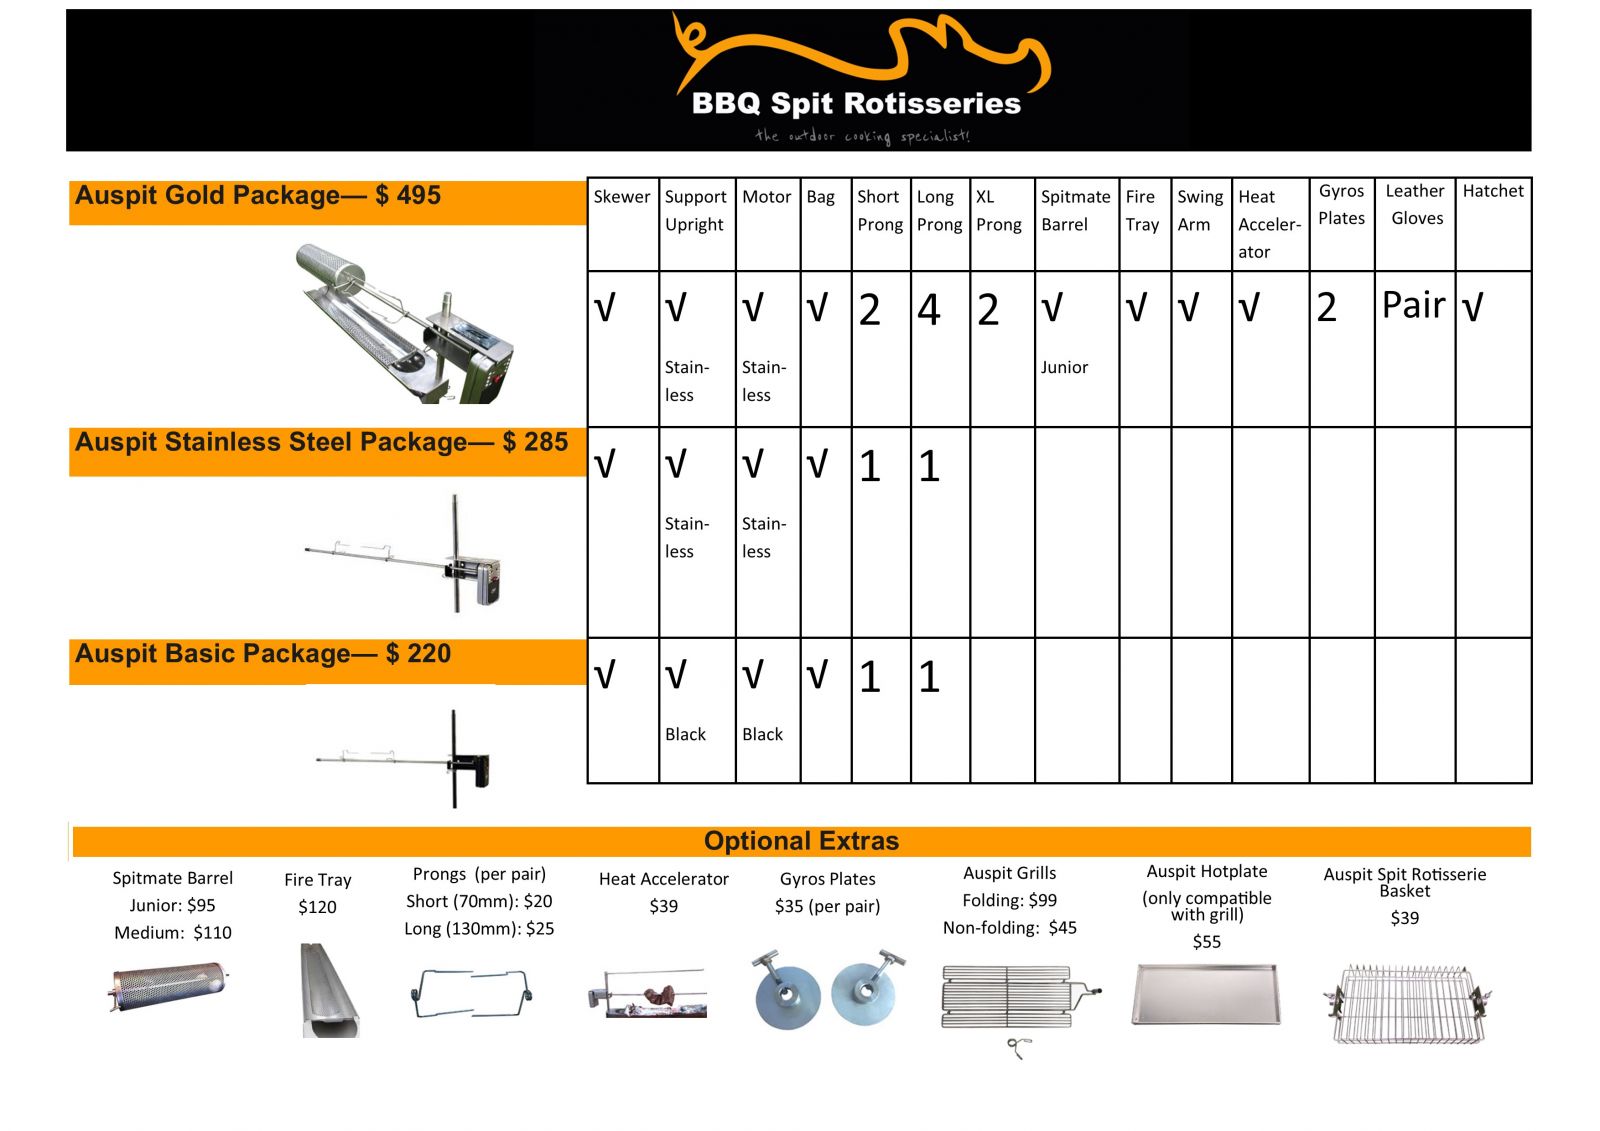 This image shows a comparison chart for what is included in each of the auspit portable camping spit models